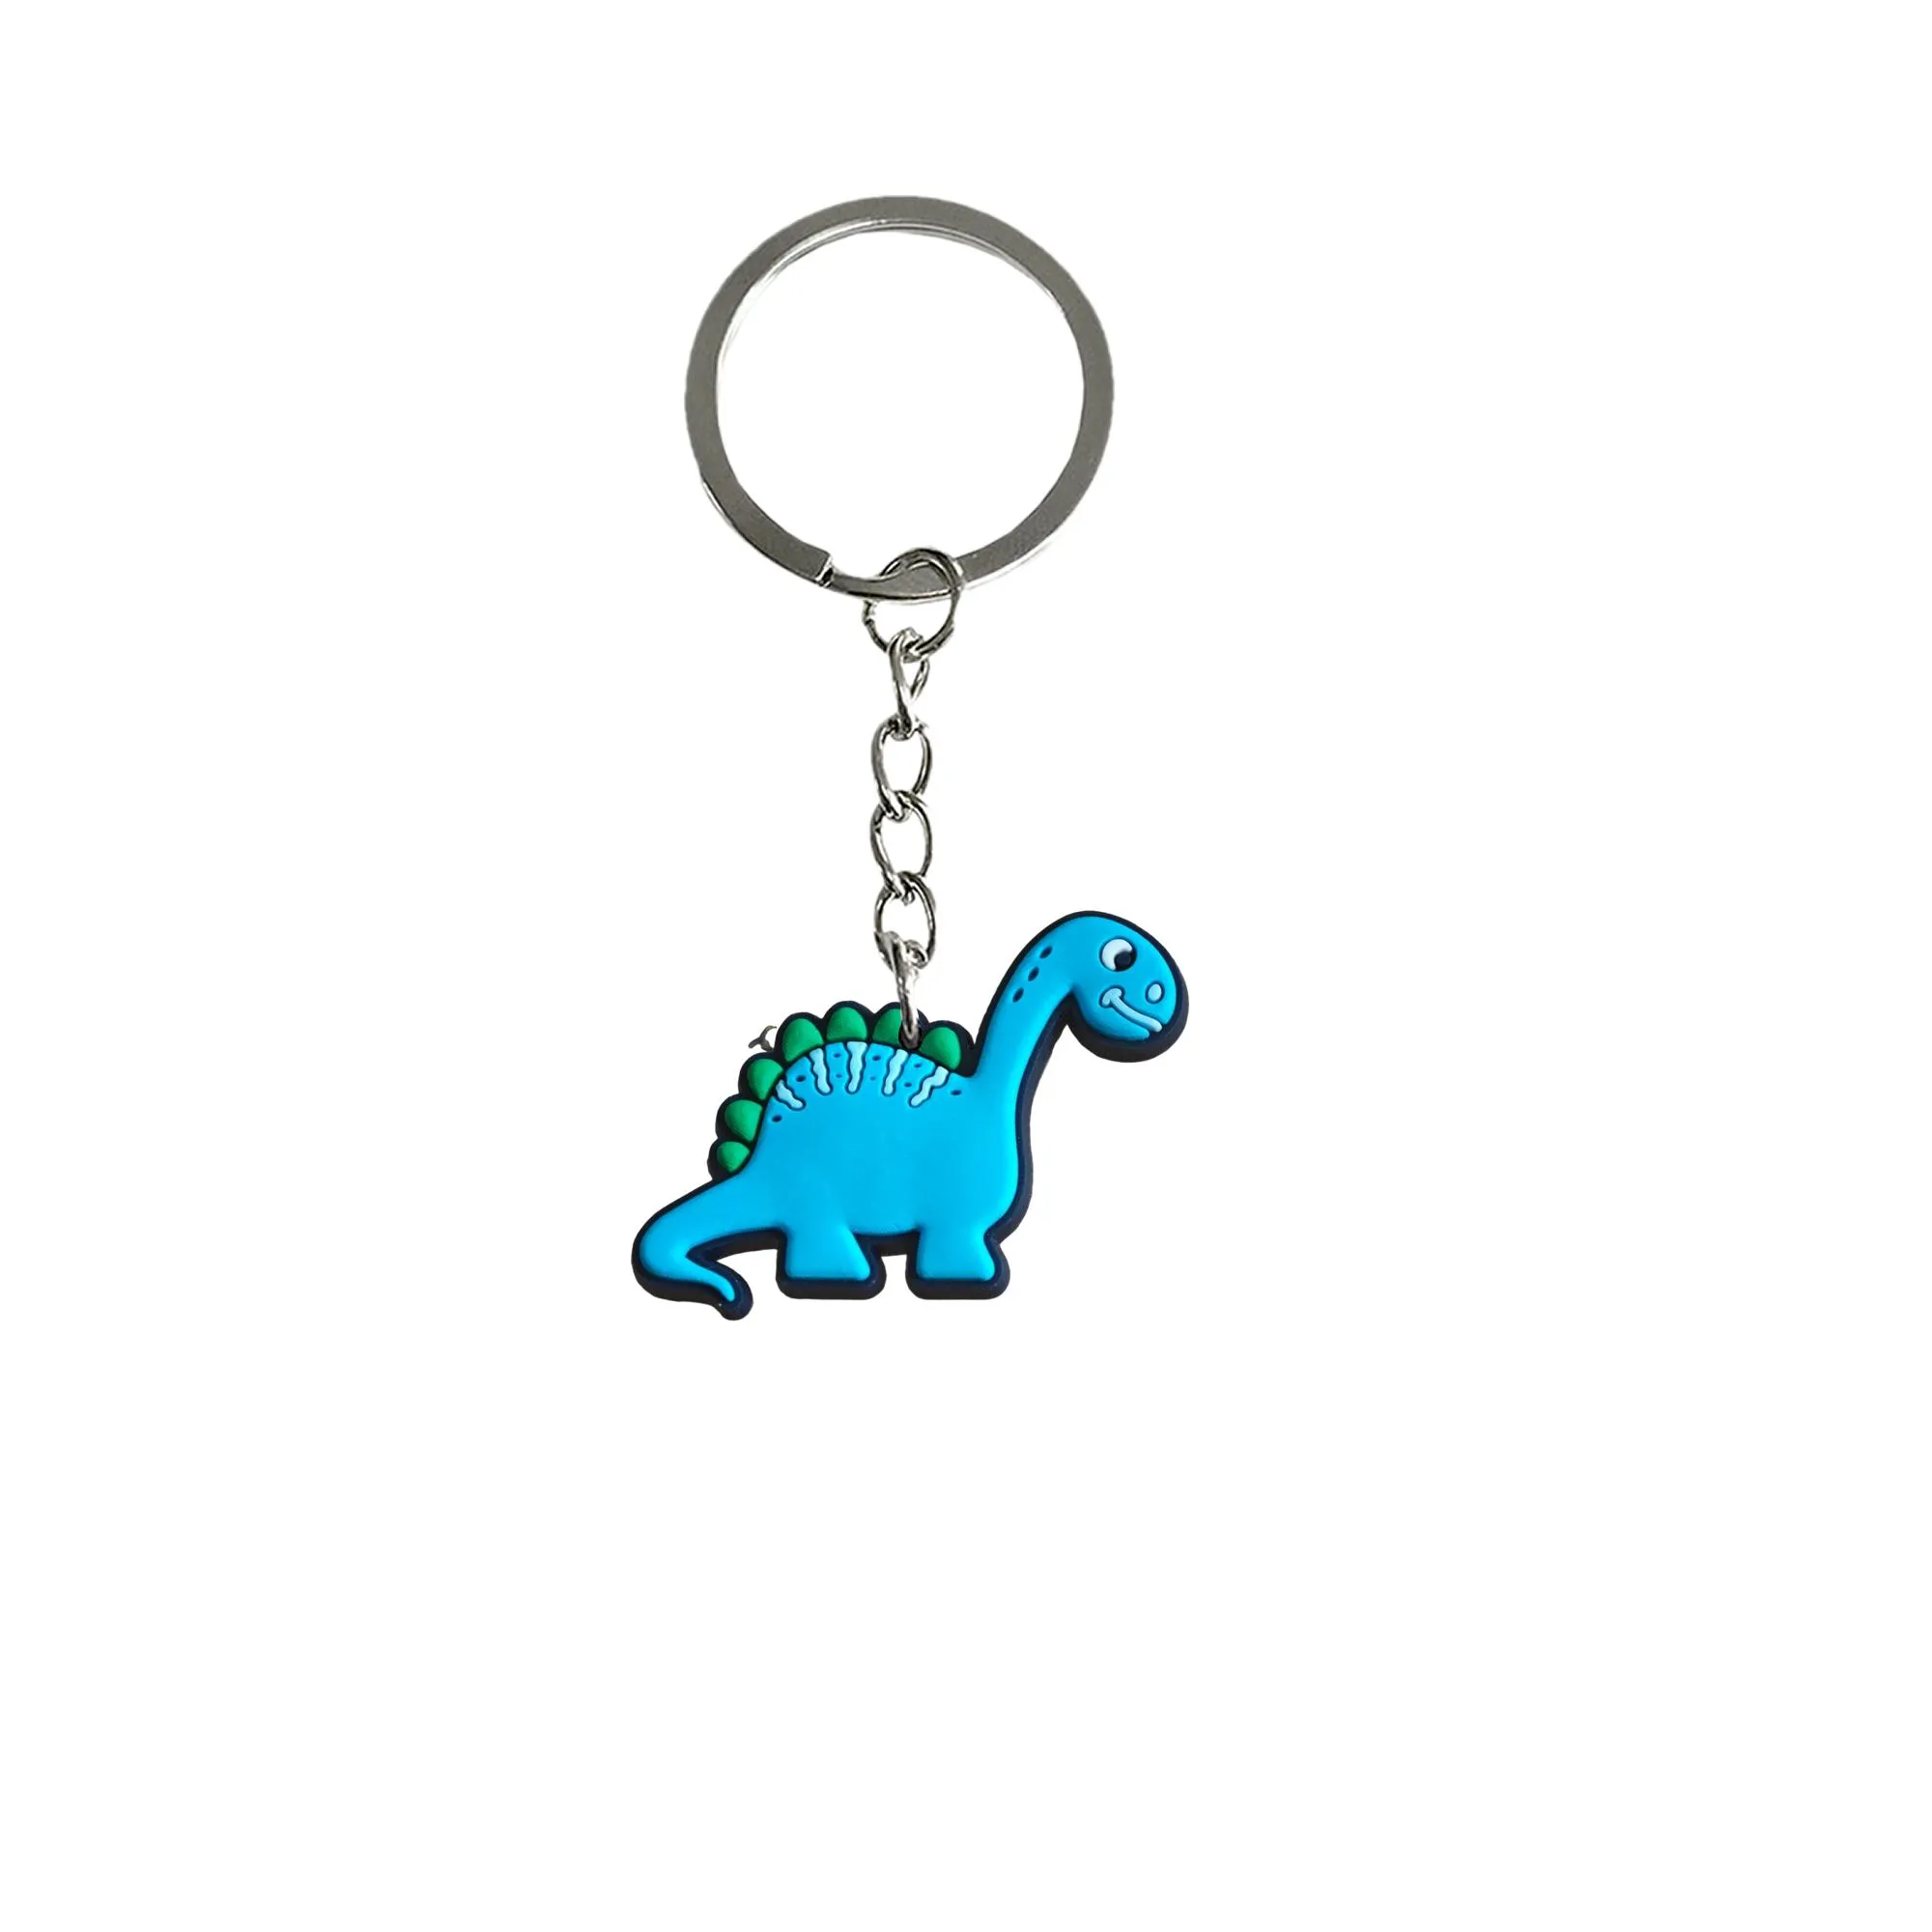 dinosaur keychain keyring for men keychains kids party favors suitable schoolbag car bag goodie stuffers supplies pendants accessories birthday